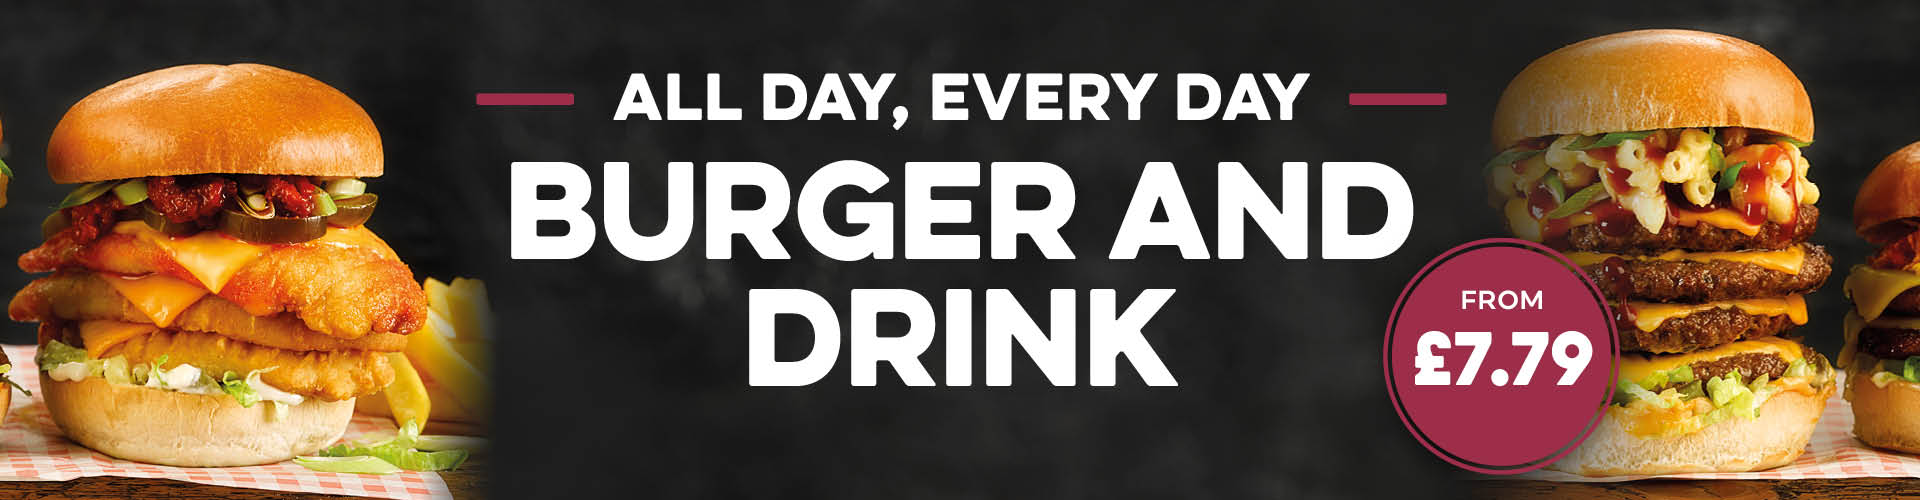 Enjoy a burger and a soft drink from just £7.79